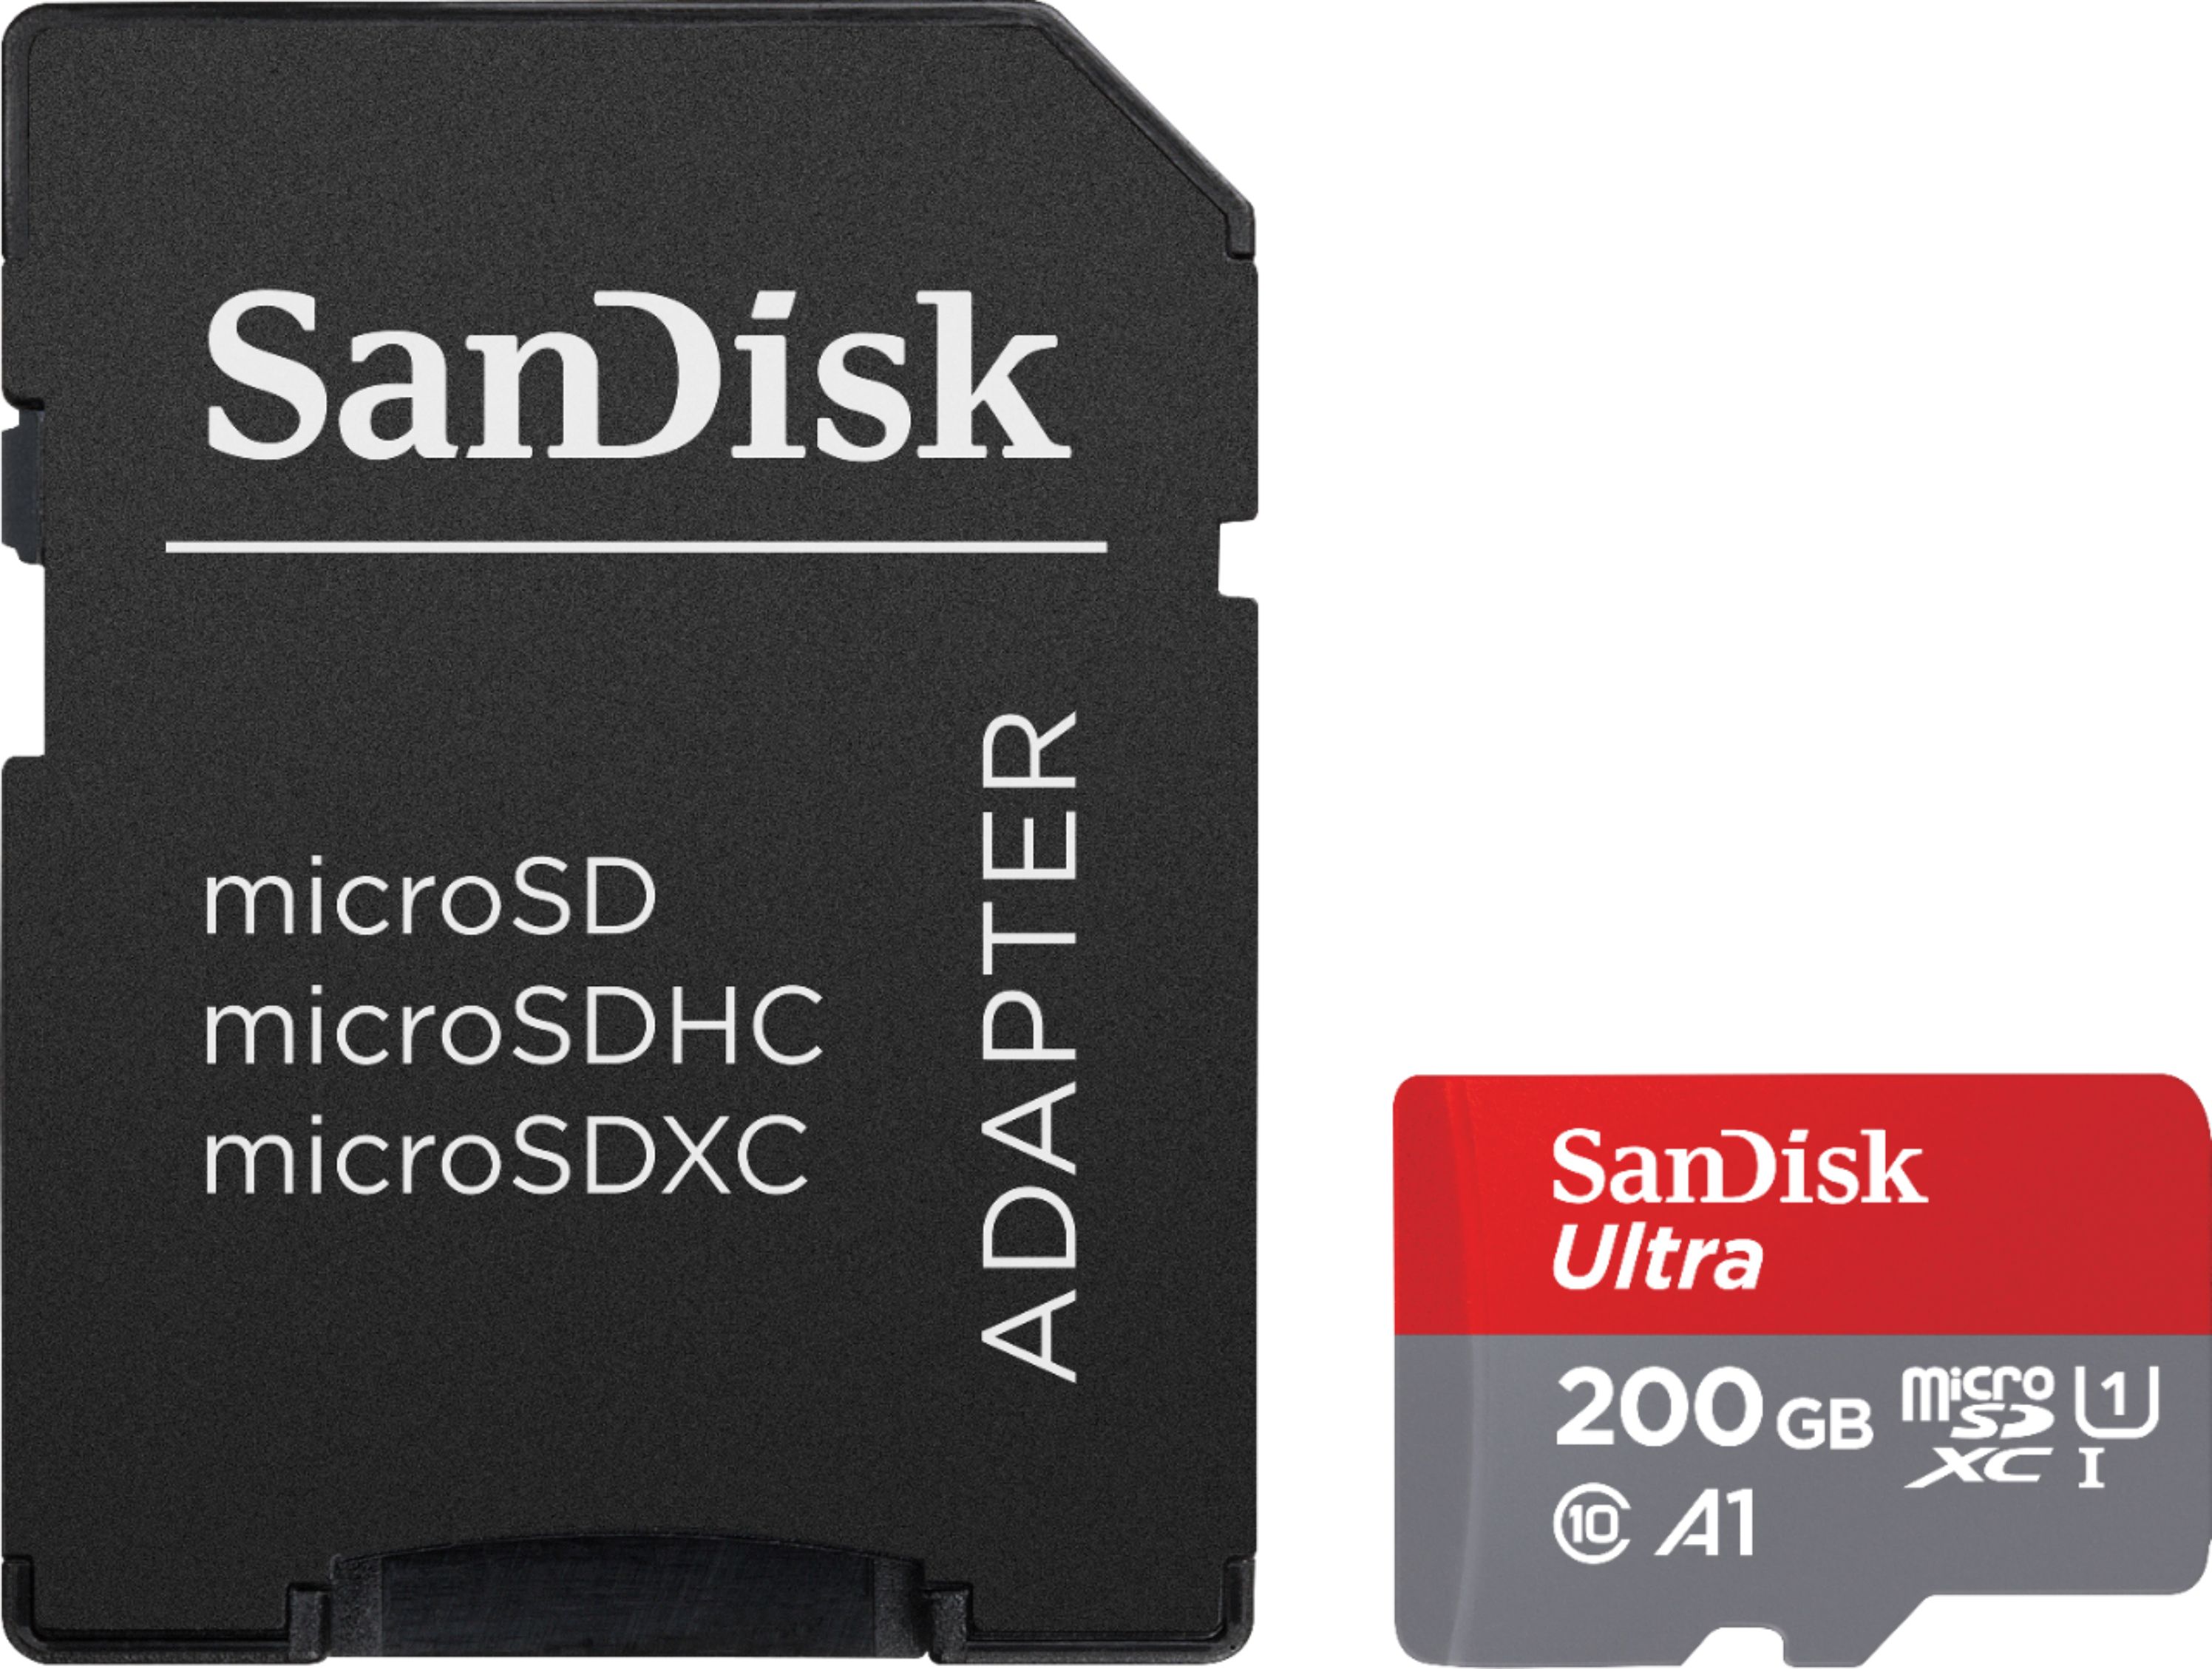 100MBs A1 U1 C10 Works with SanDisk SanDisk Ultra 200GB MicroSDXC Verified for LG H700 by SanFlash